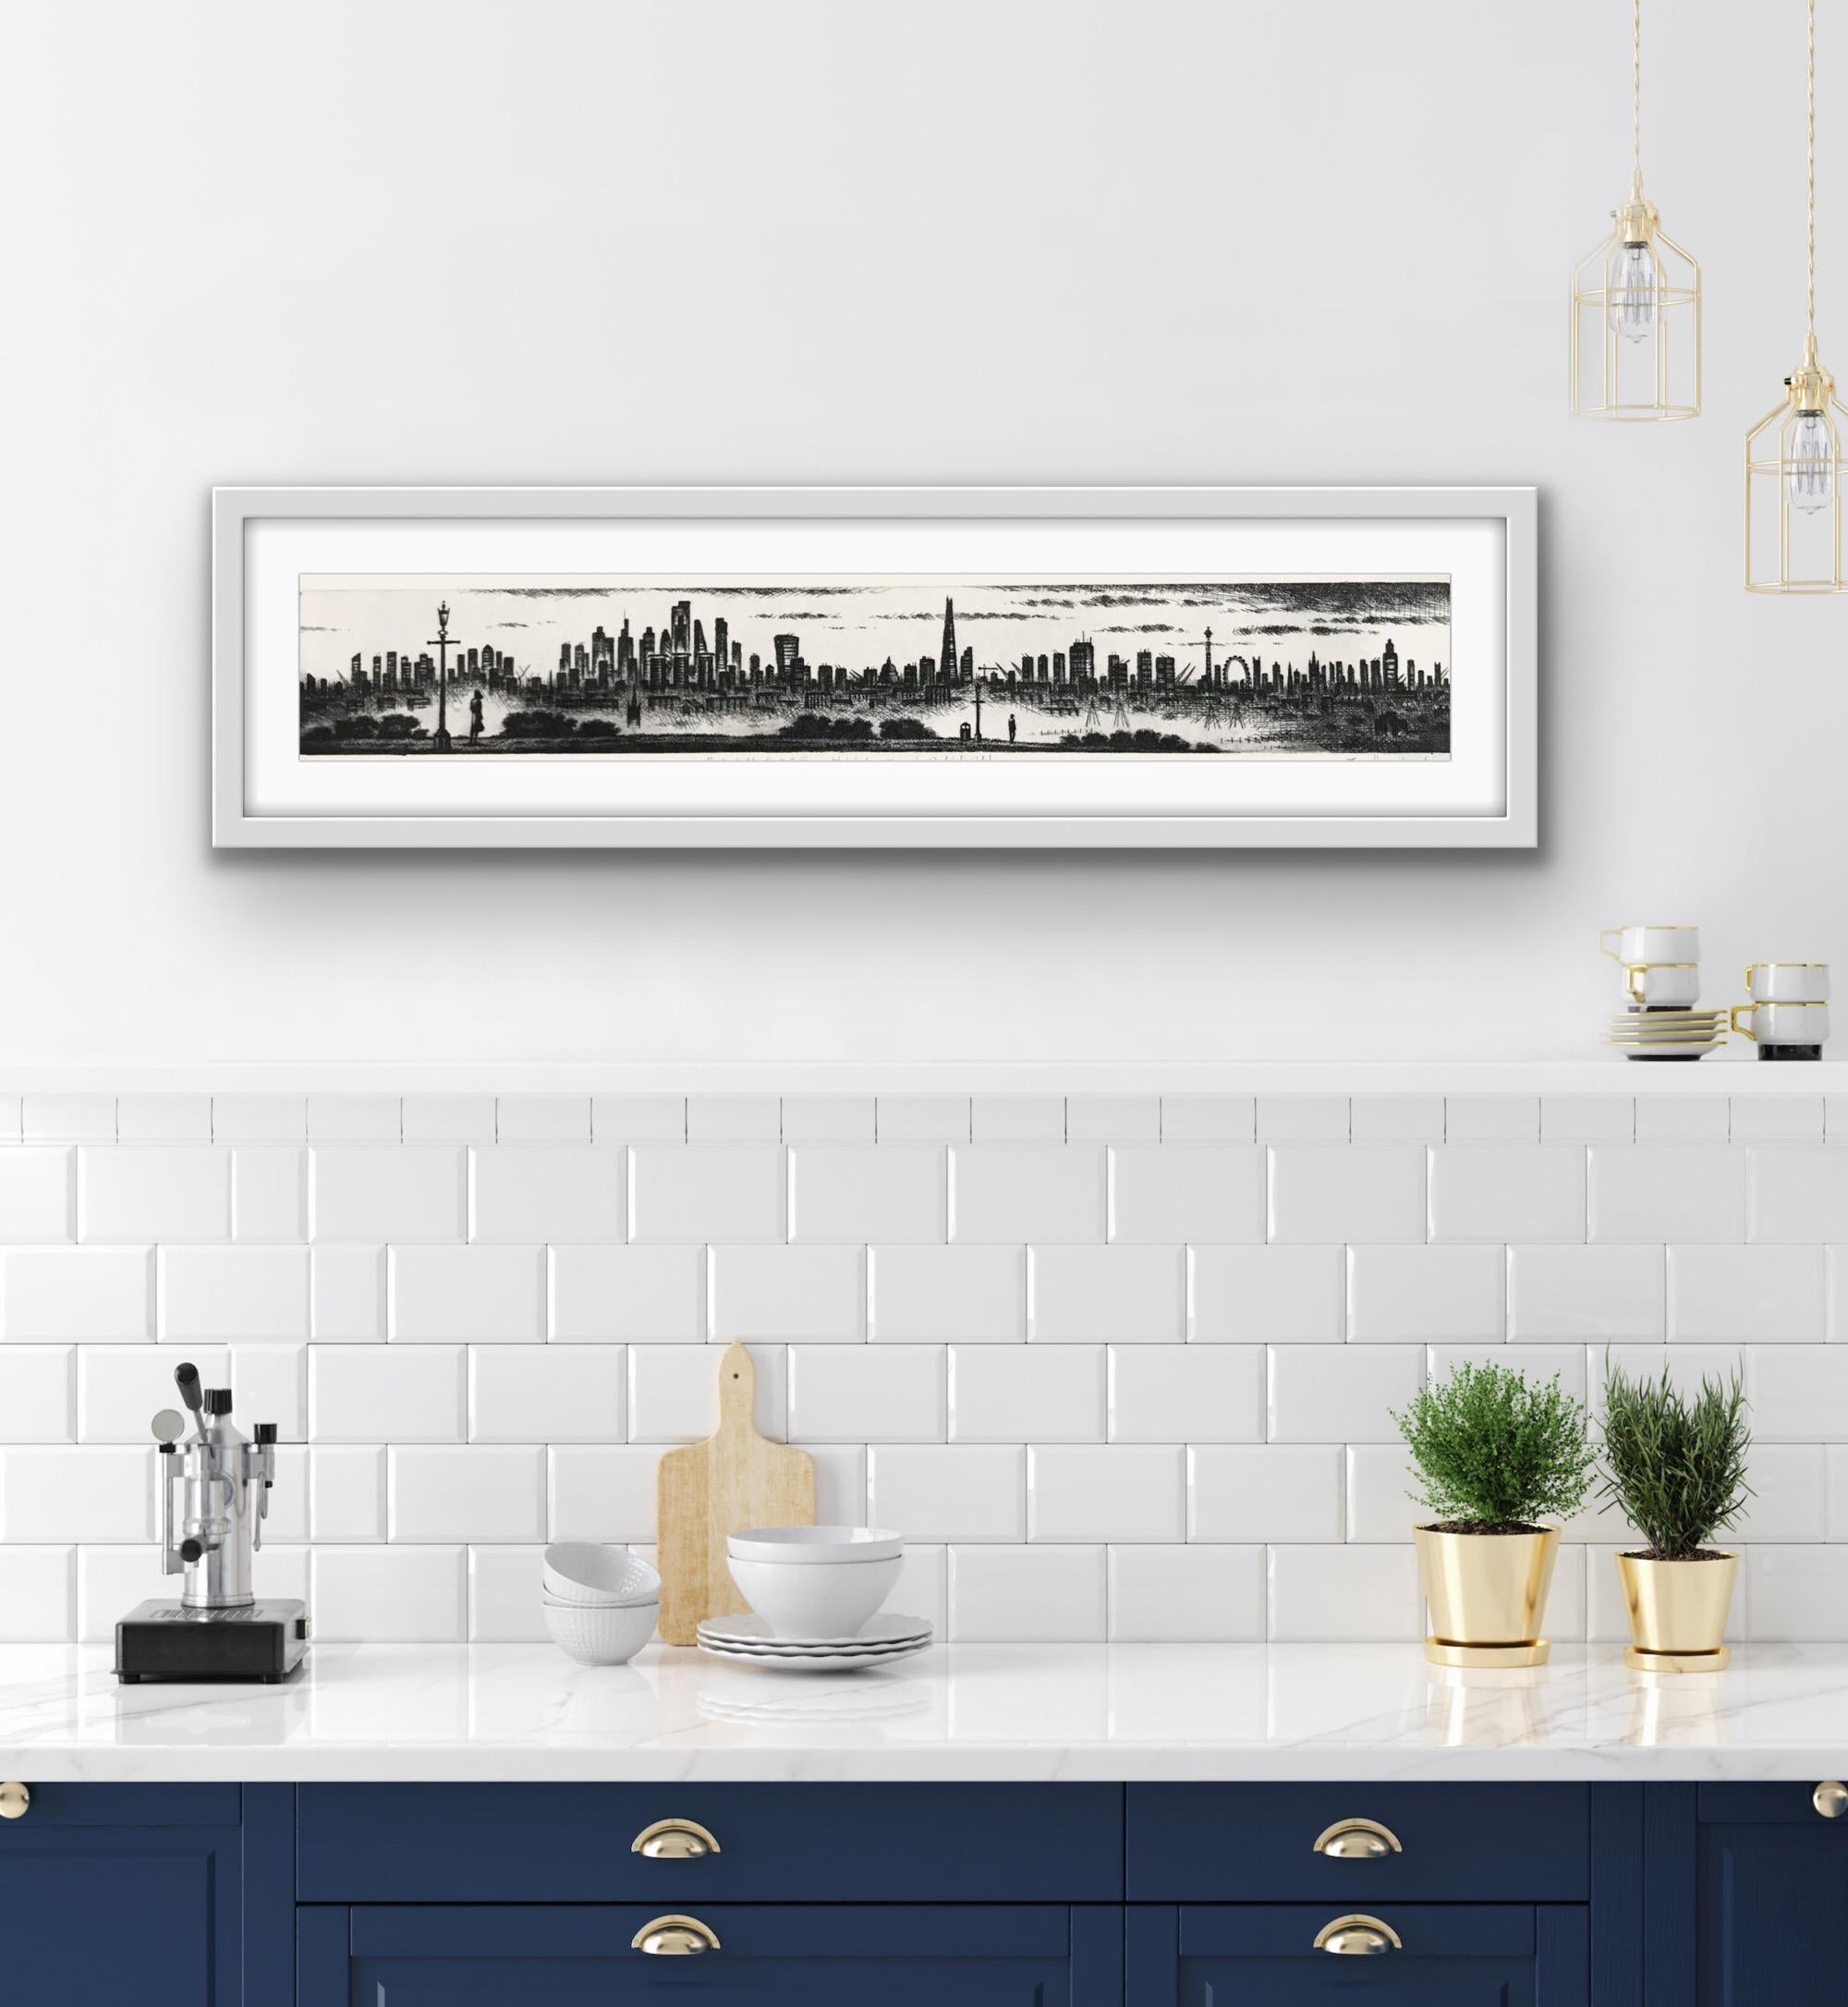 Primrose Hill - London by John Duffin is a limited edition print. The scene depicts a stunning panoramic view of Londons greatest sights.
John Duffin is a painter and printmaker whose work is based on the modern environments of cities and towns,